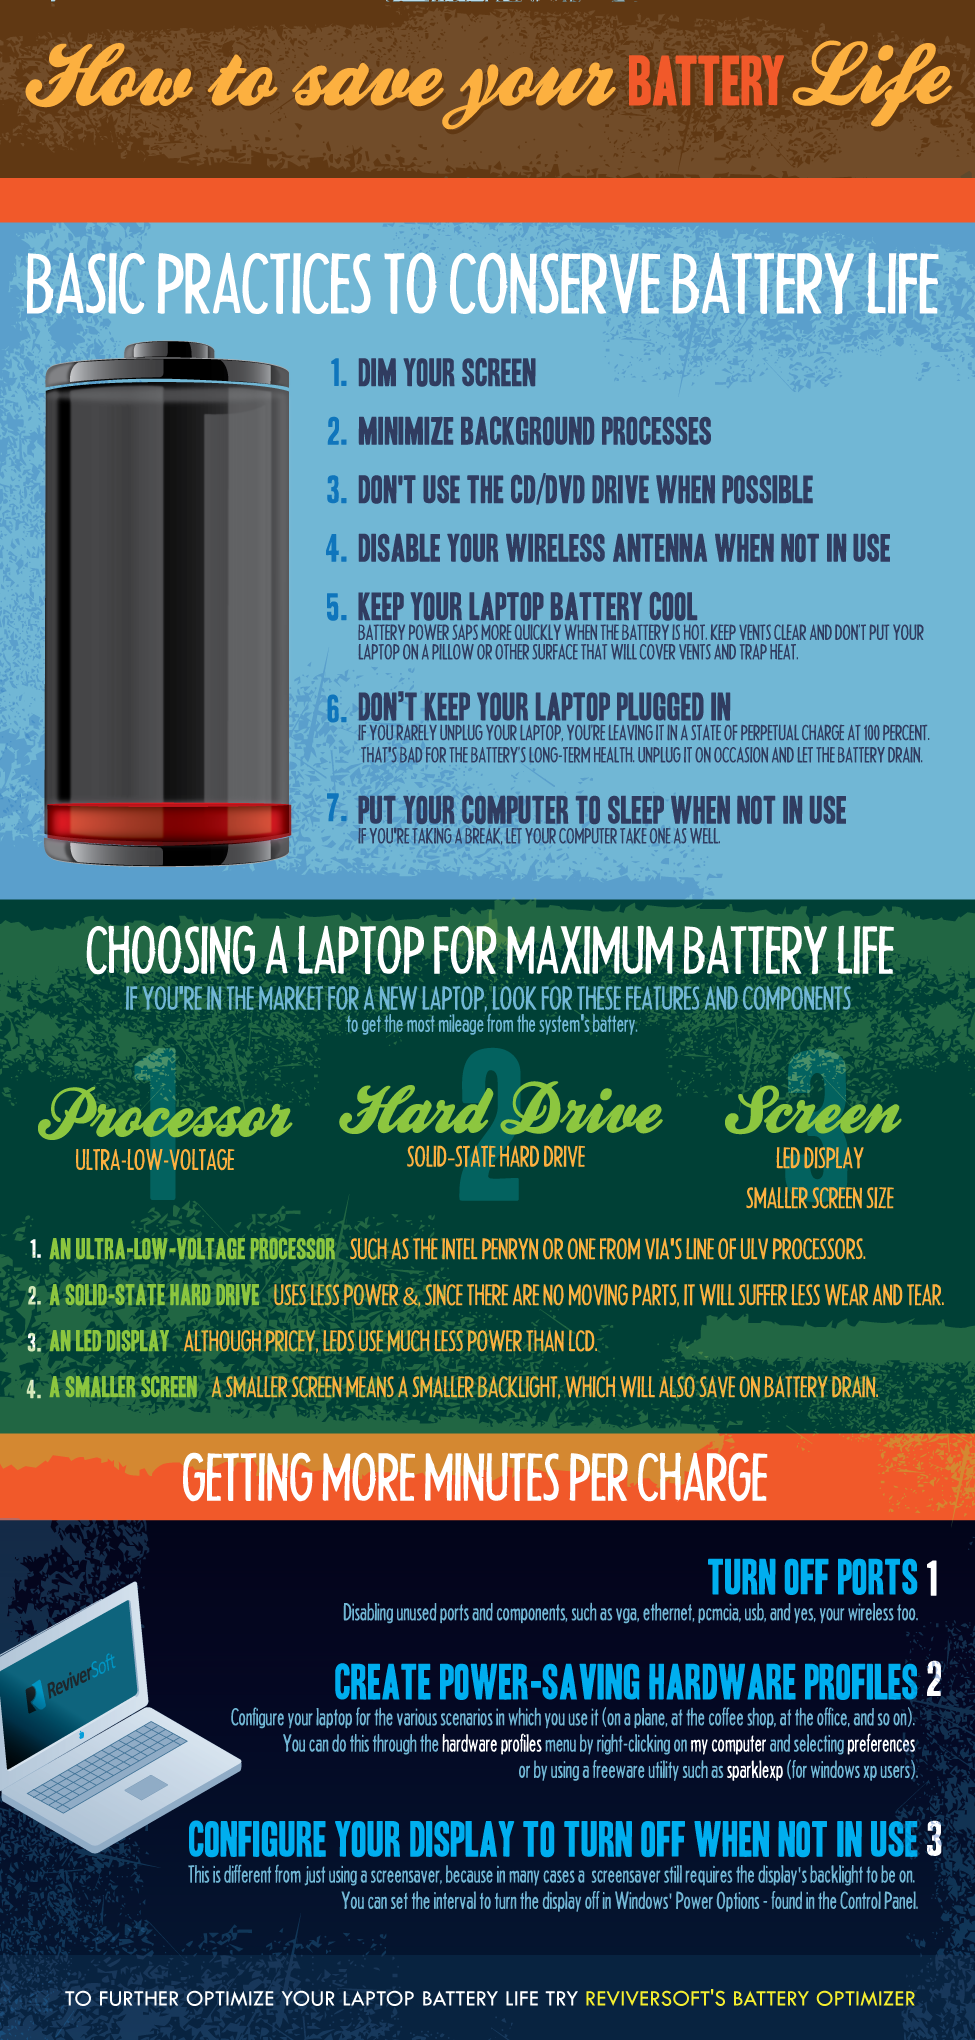 How to Get the Most Out of your Laptop Battery Life